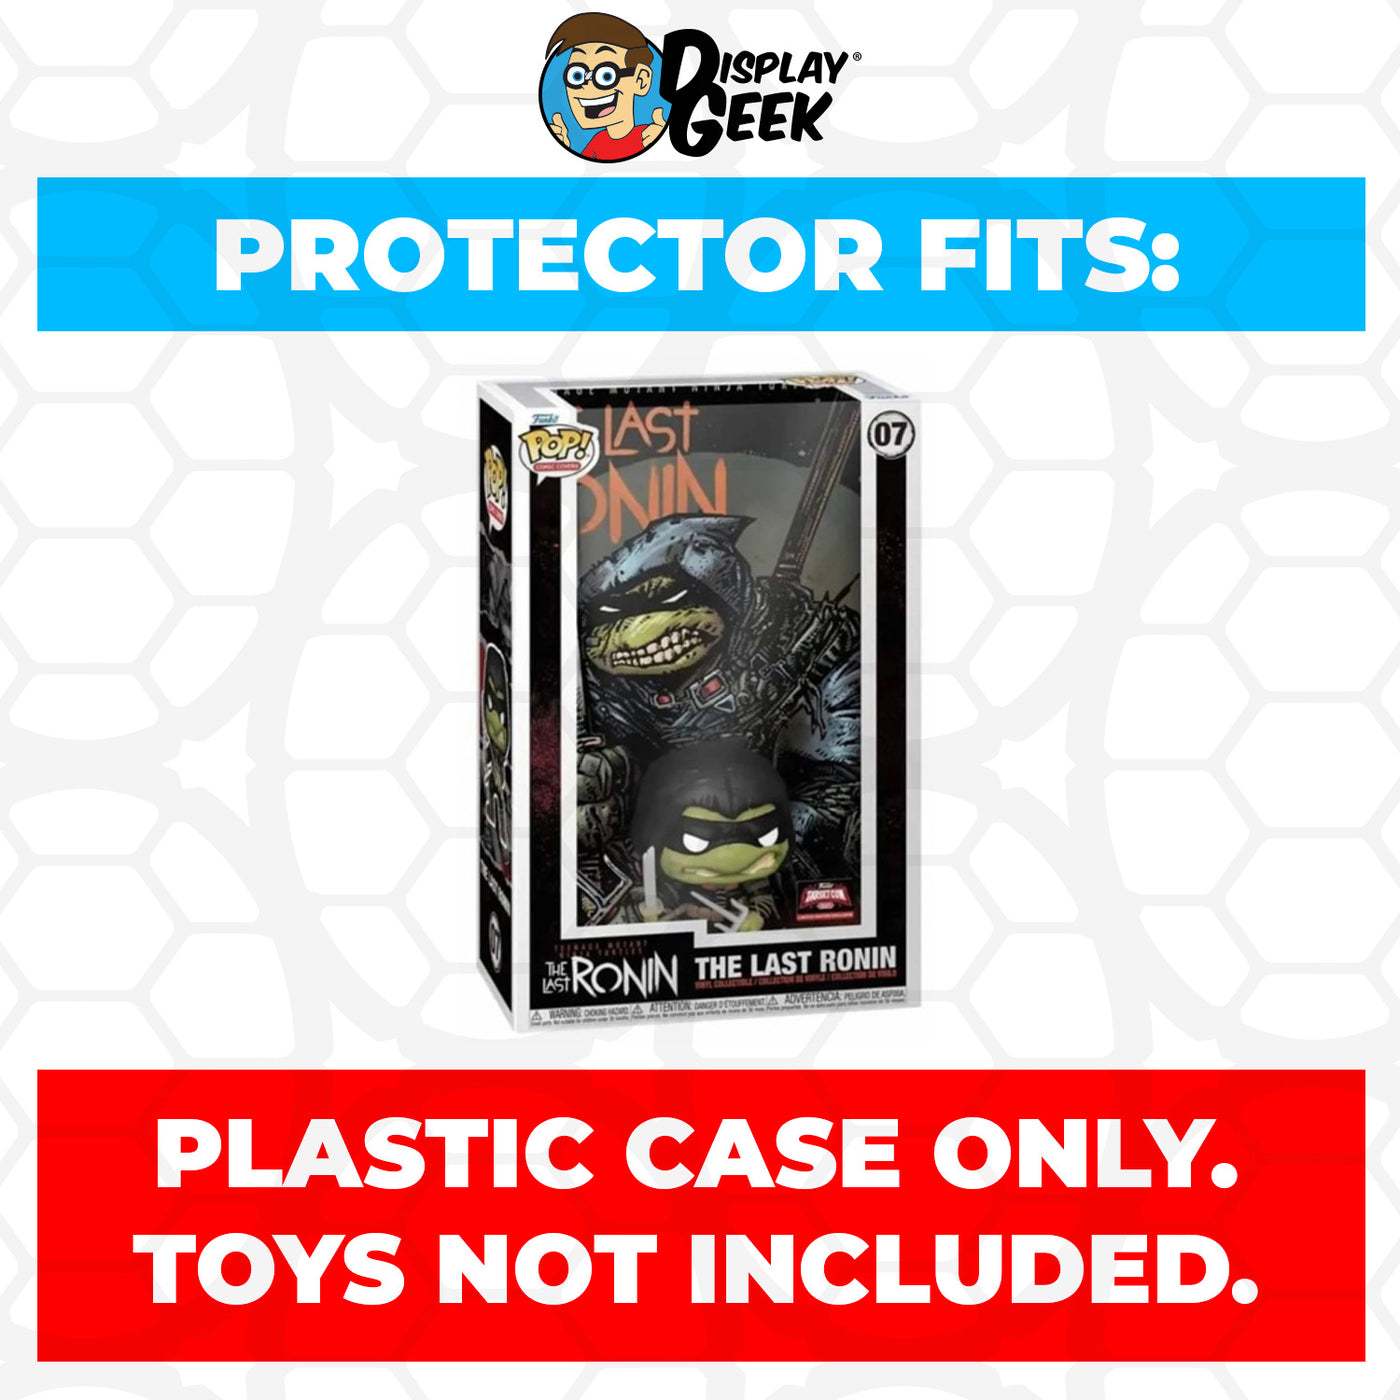 Pop Protector for The Last Ronin #07 TargetCon Funko Pop Comic Covers on The Protector Guide App by Display Geek